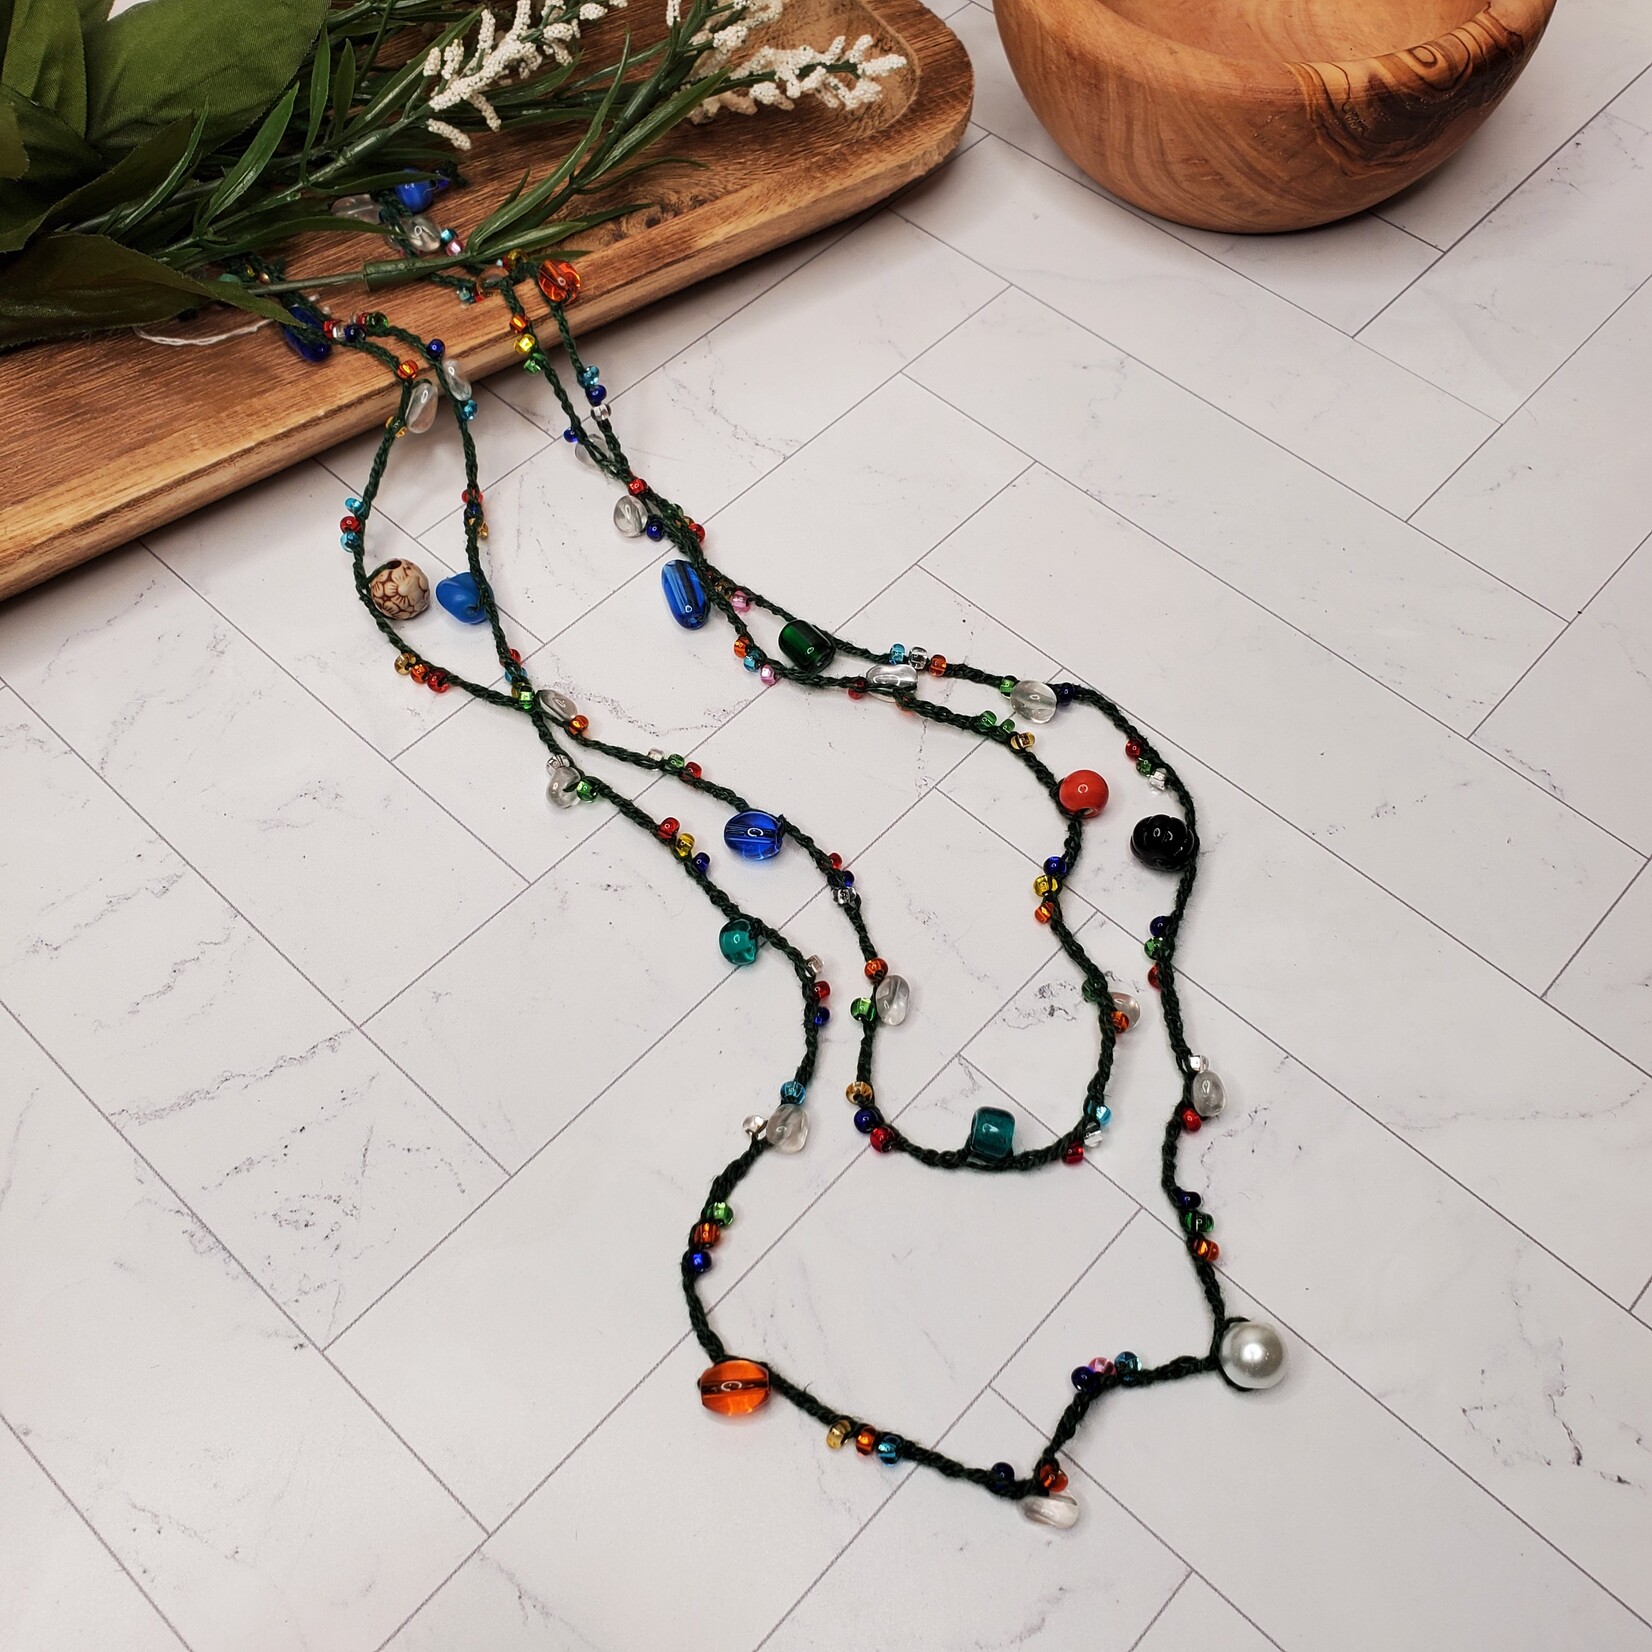 Crescent Moon Jewelry of the Sierras Bead Crochet Double Necklace - Multi Colored & Green - 30"